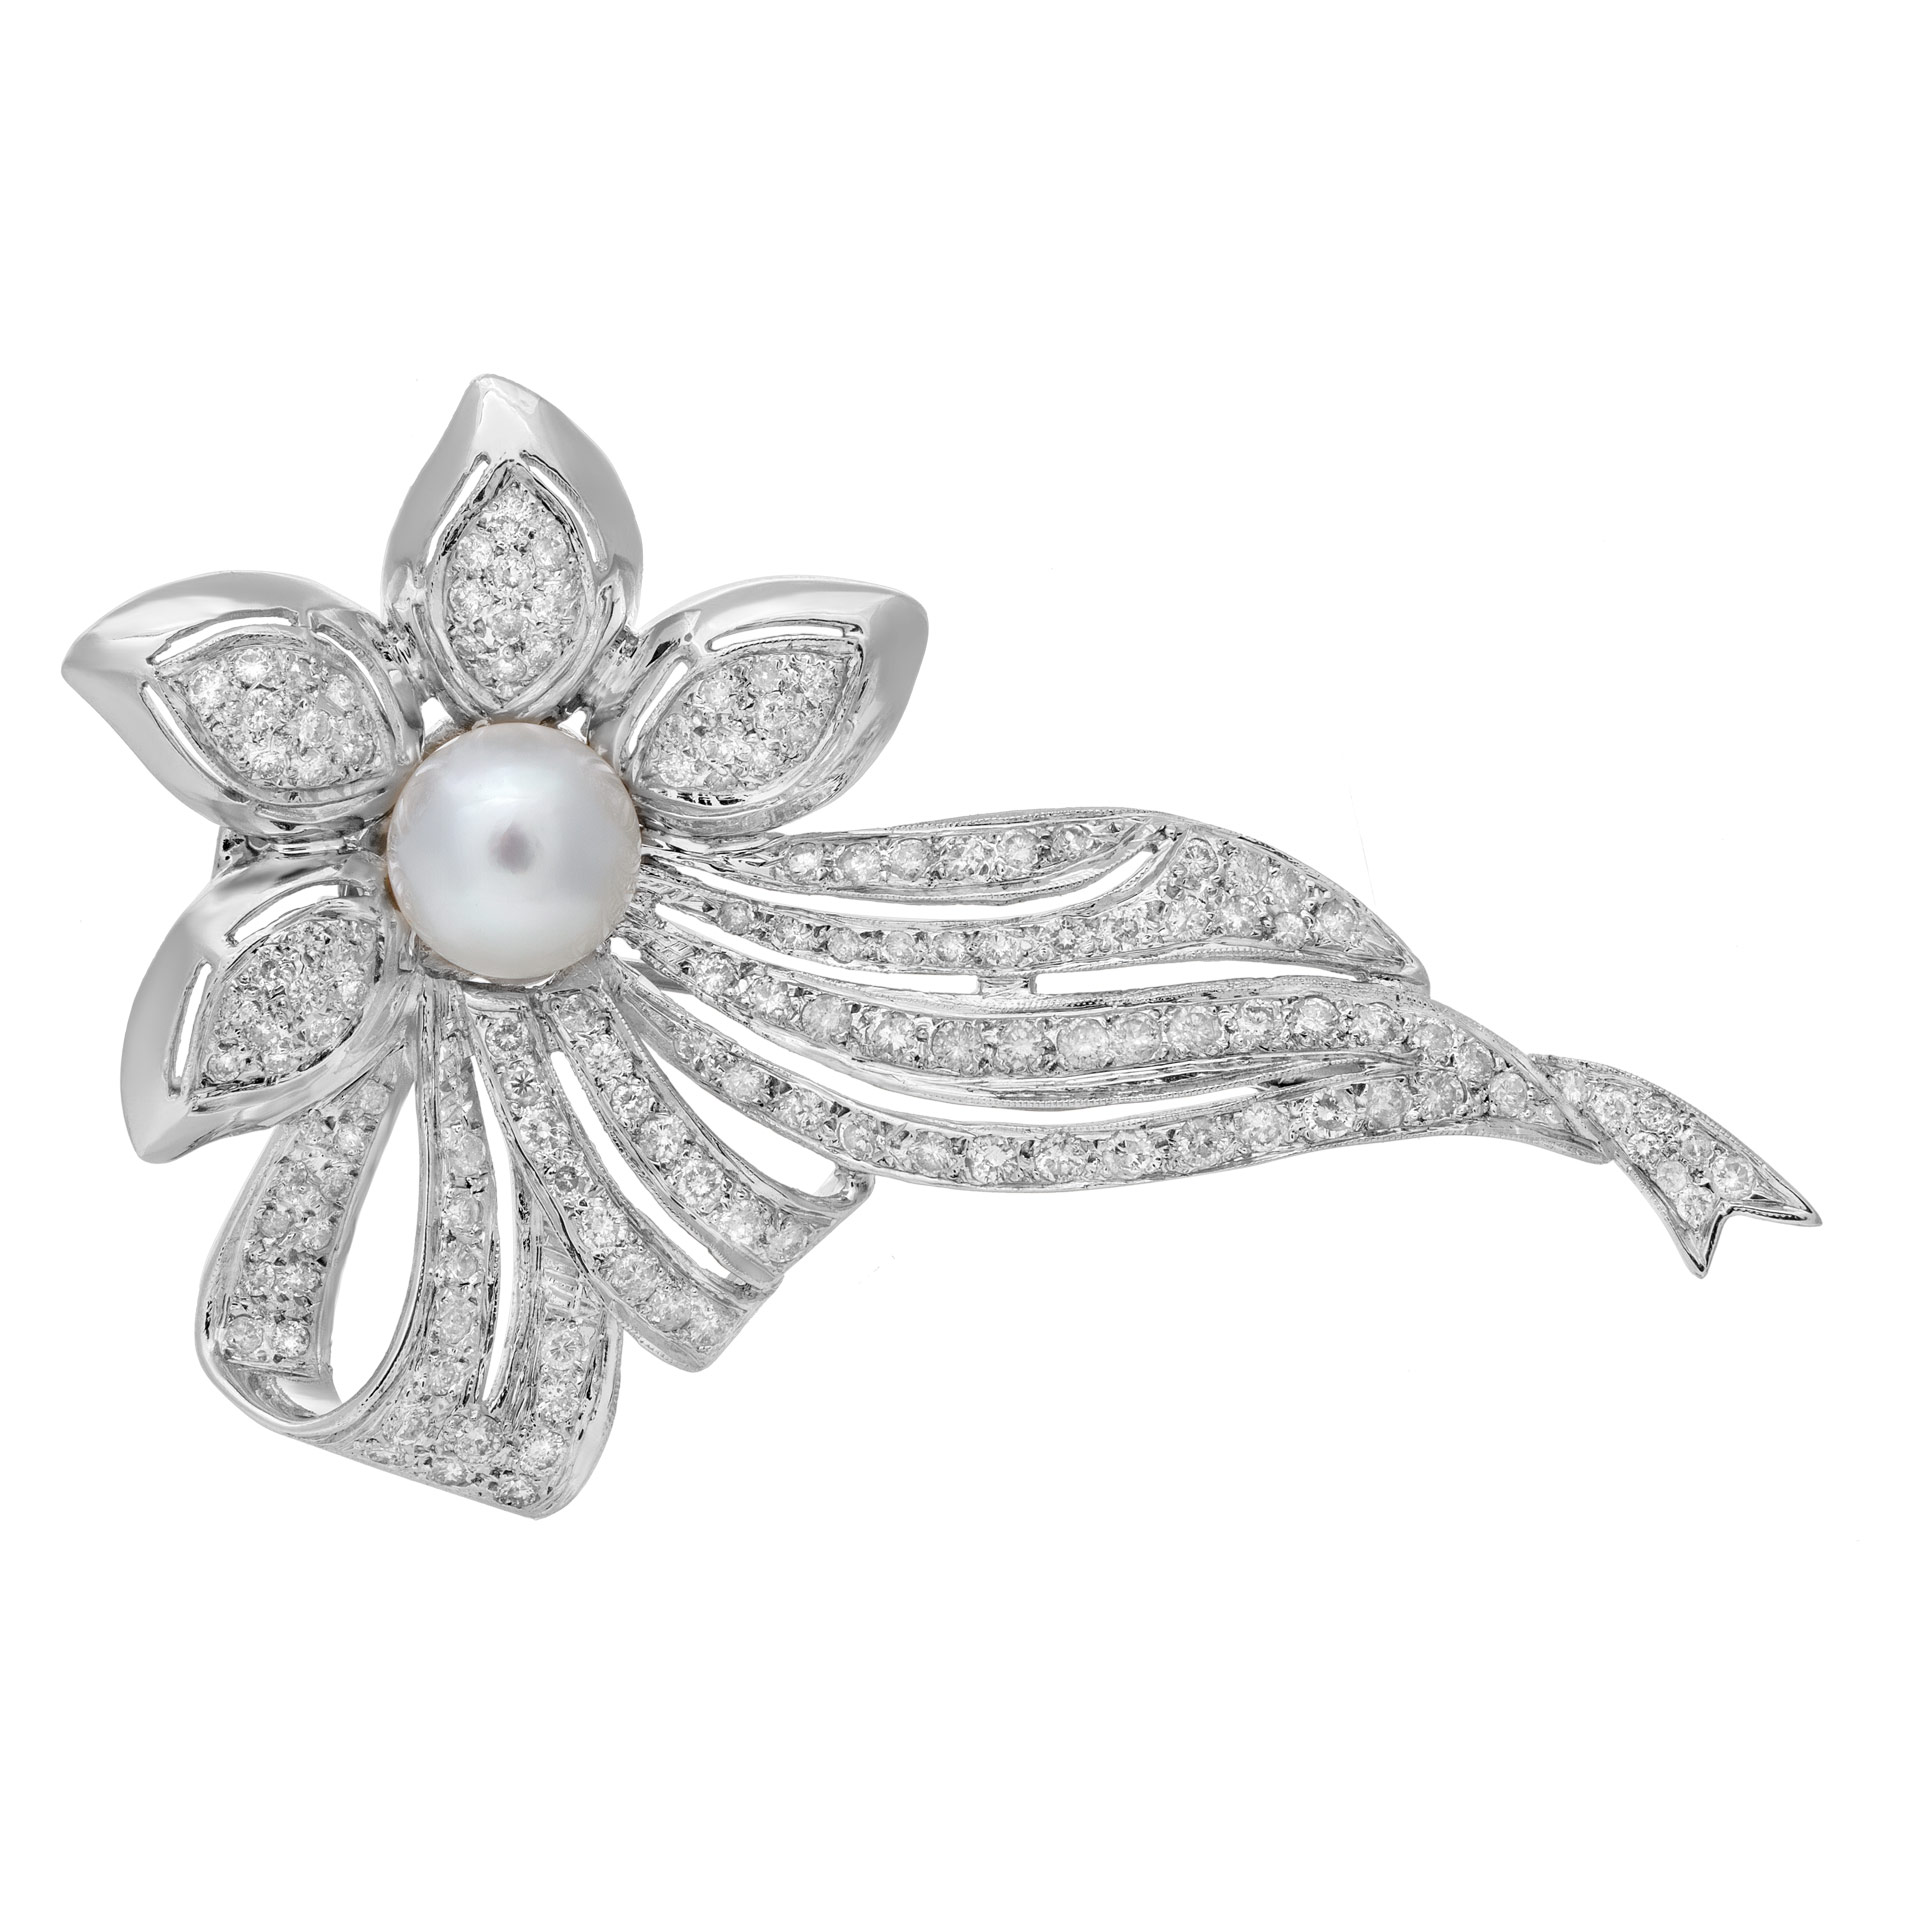 A magnificent flower brooch in 18k white gold